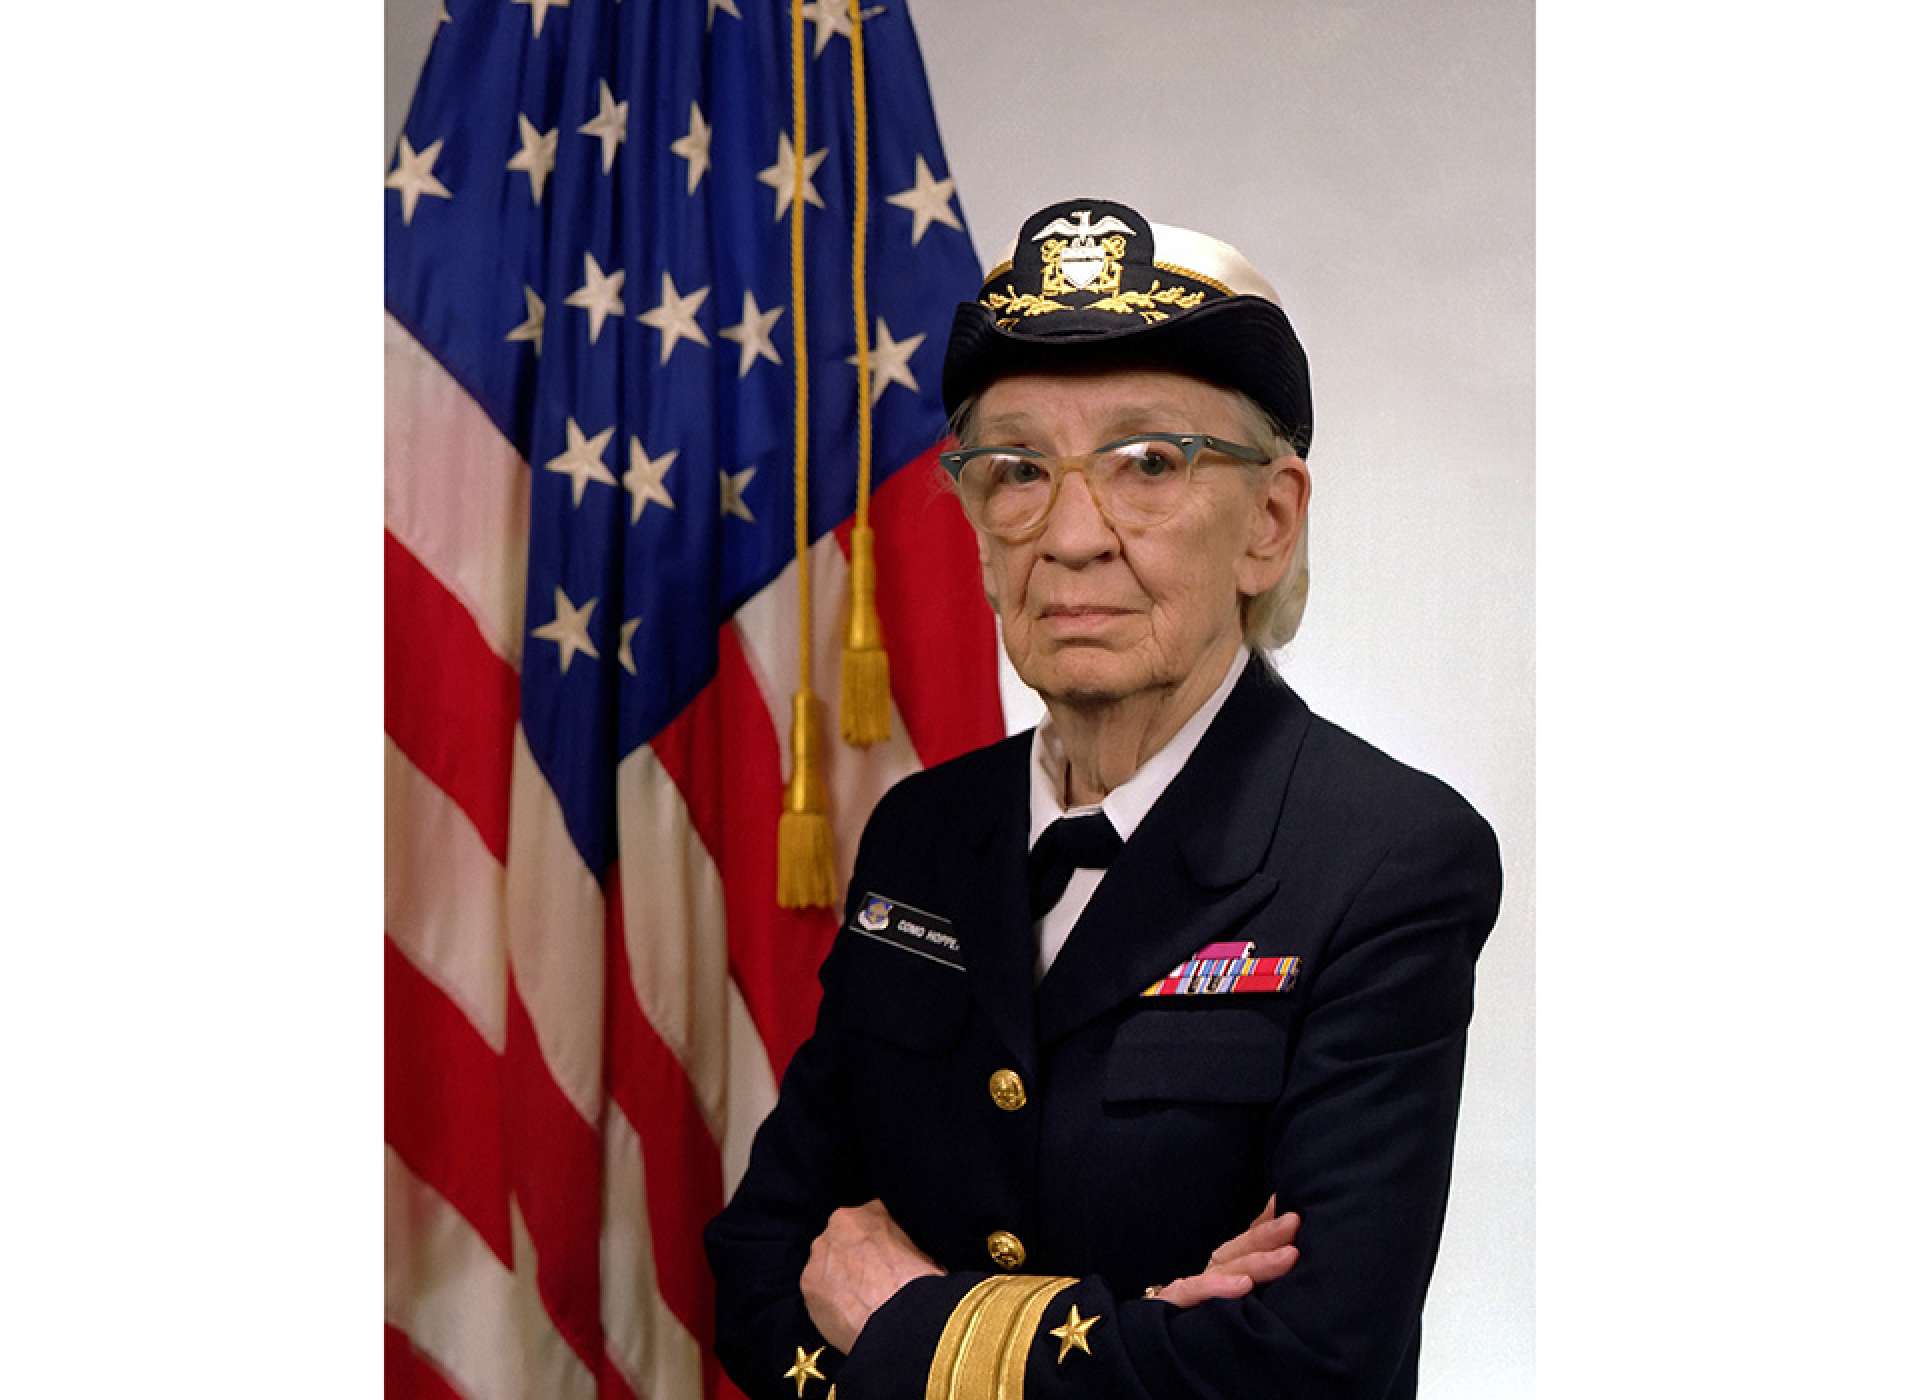 Commodore Grace Hopper’s Navy portrait from 1984